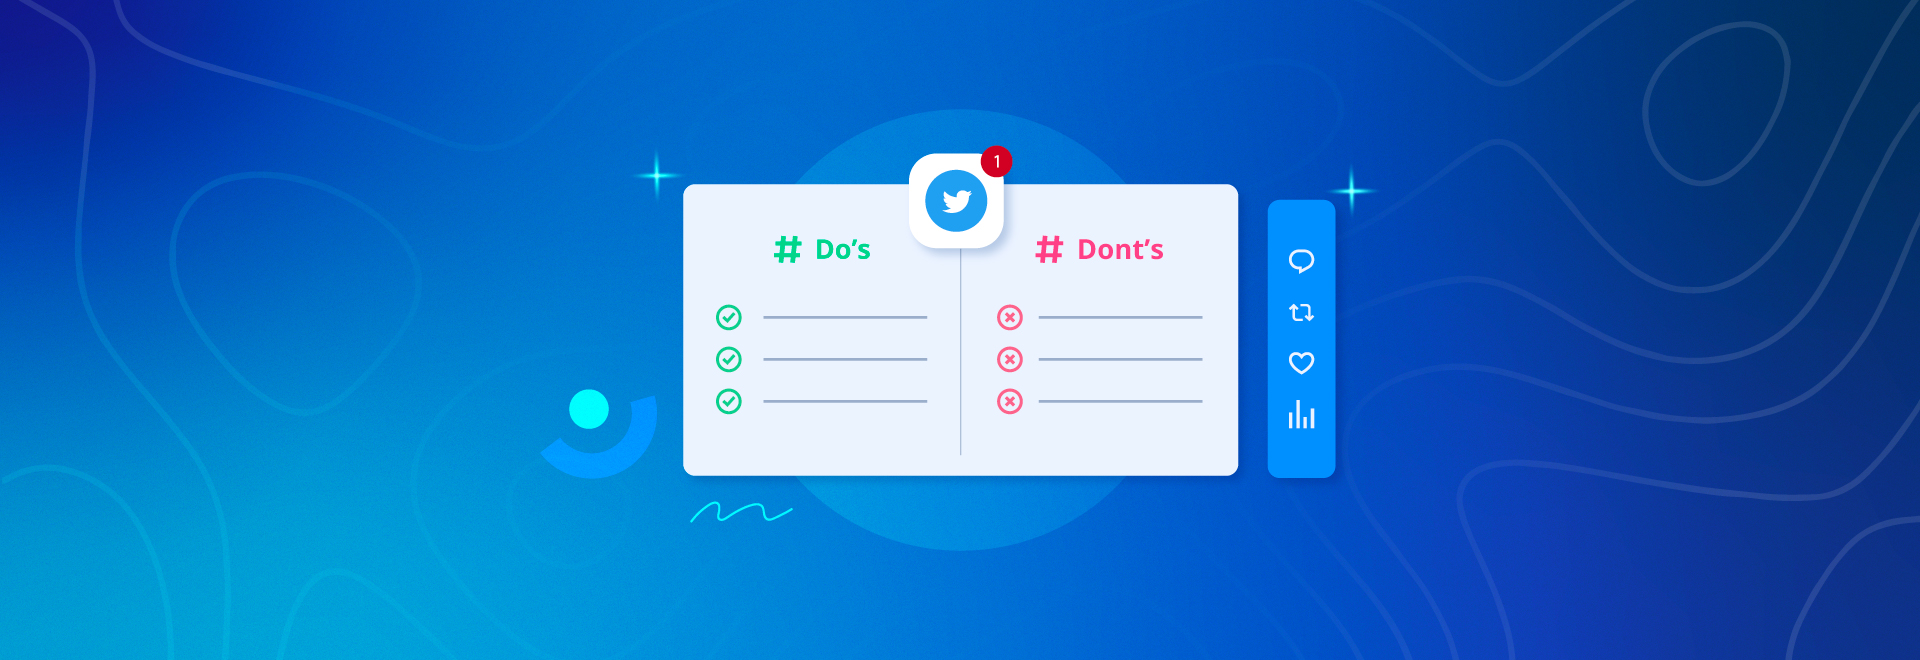 The Top Do’s and Don’ts for Brand Success on Twitter